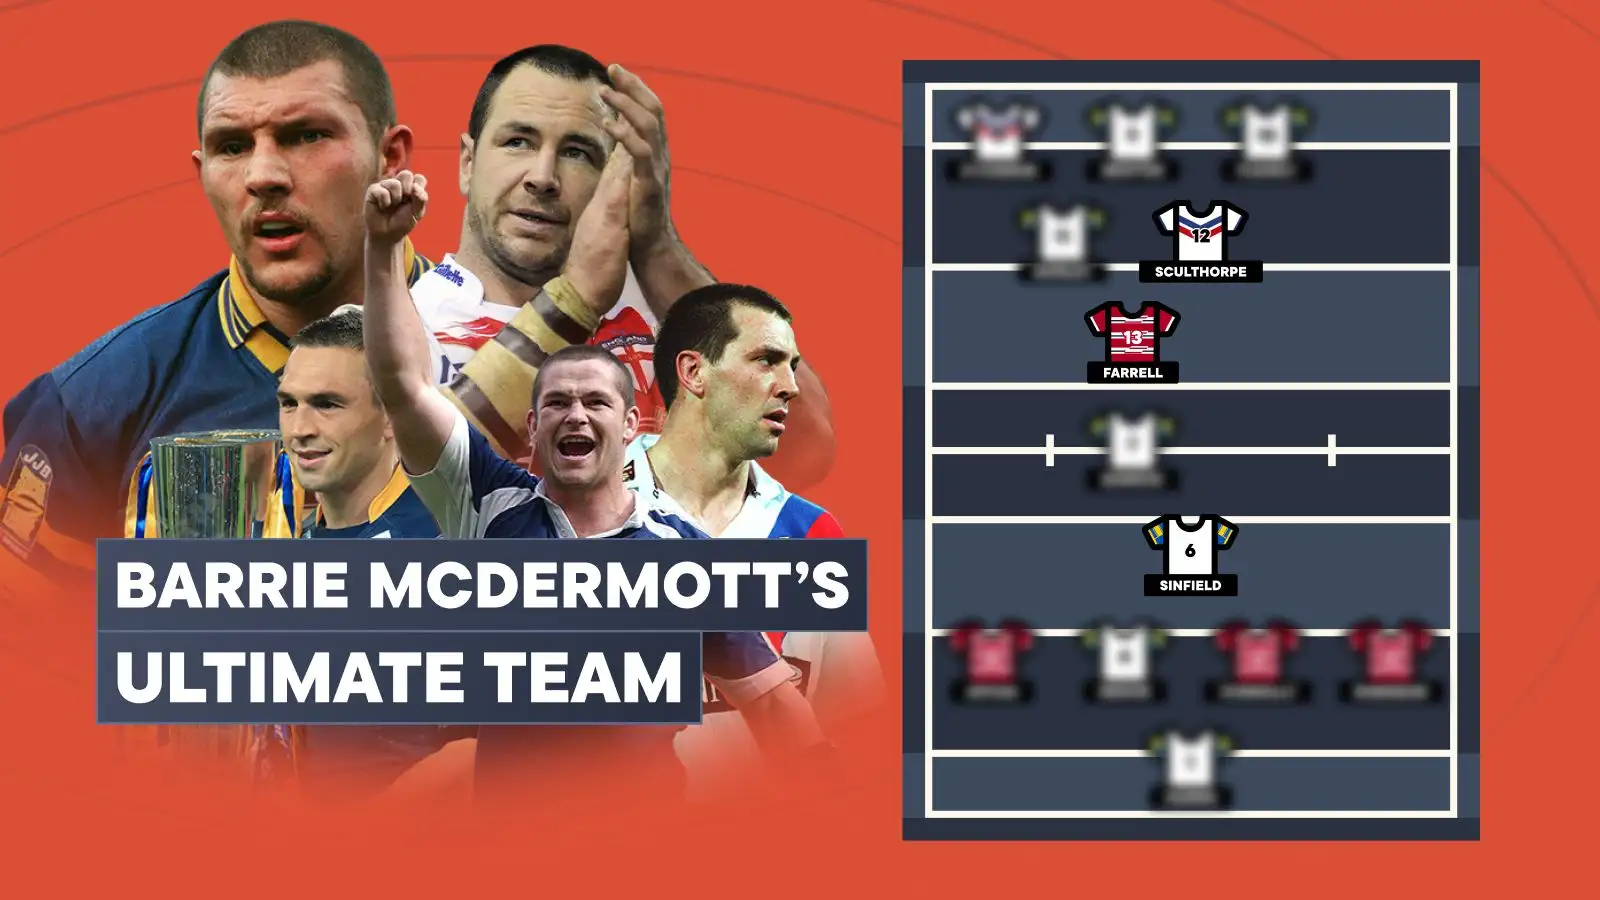 My Ultimate Team: Barrie McDermott names his greatest 13 including Leeds, Wigan, Great Britain stars